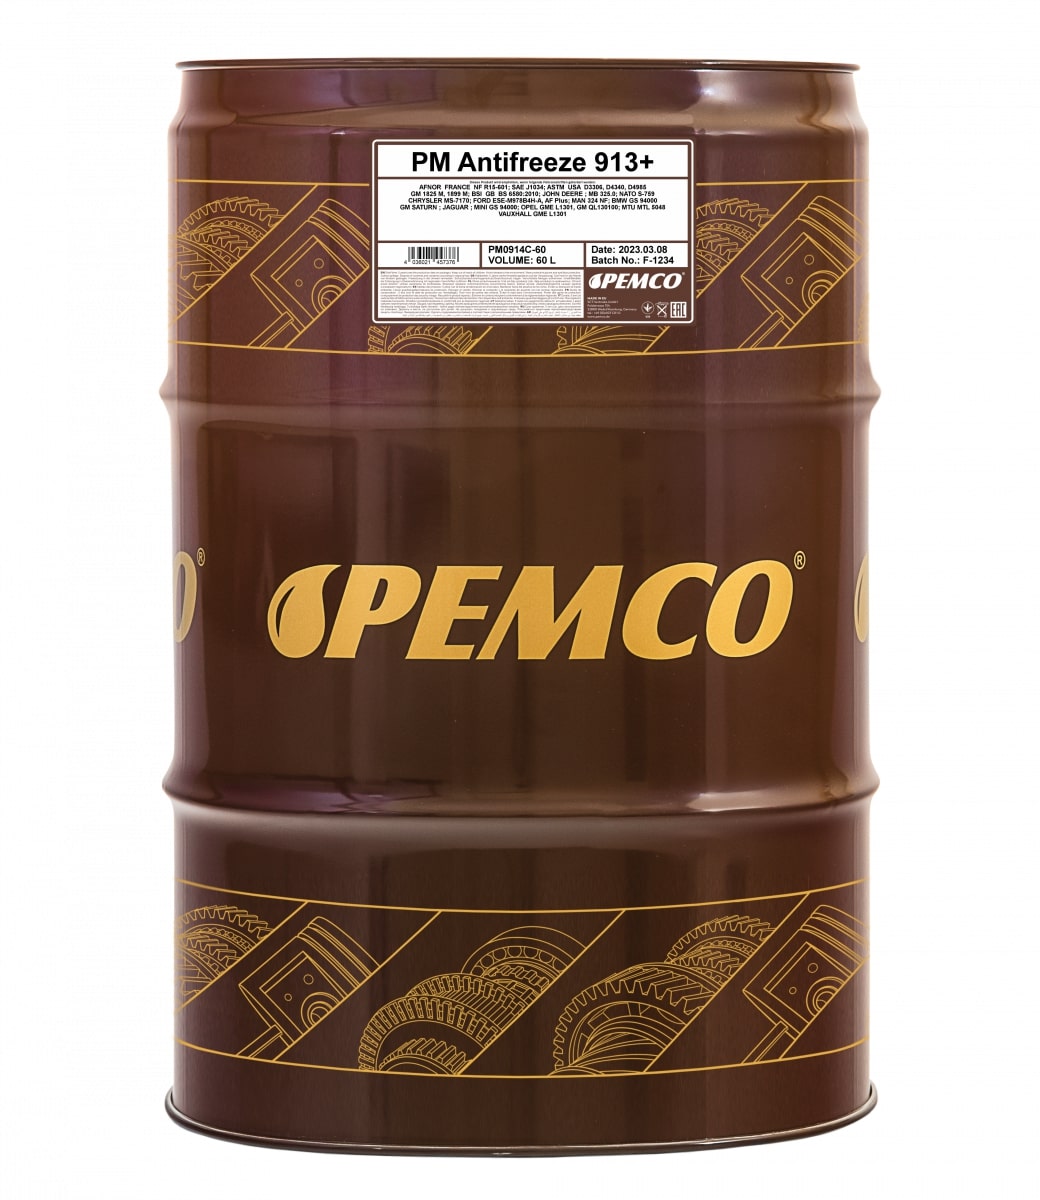 PEMCO Antifreeze 913+ (Concentrate)